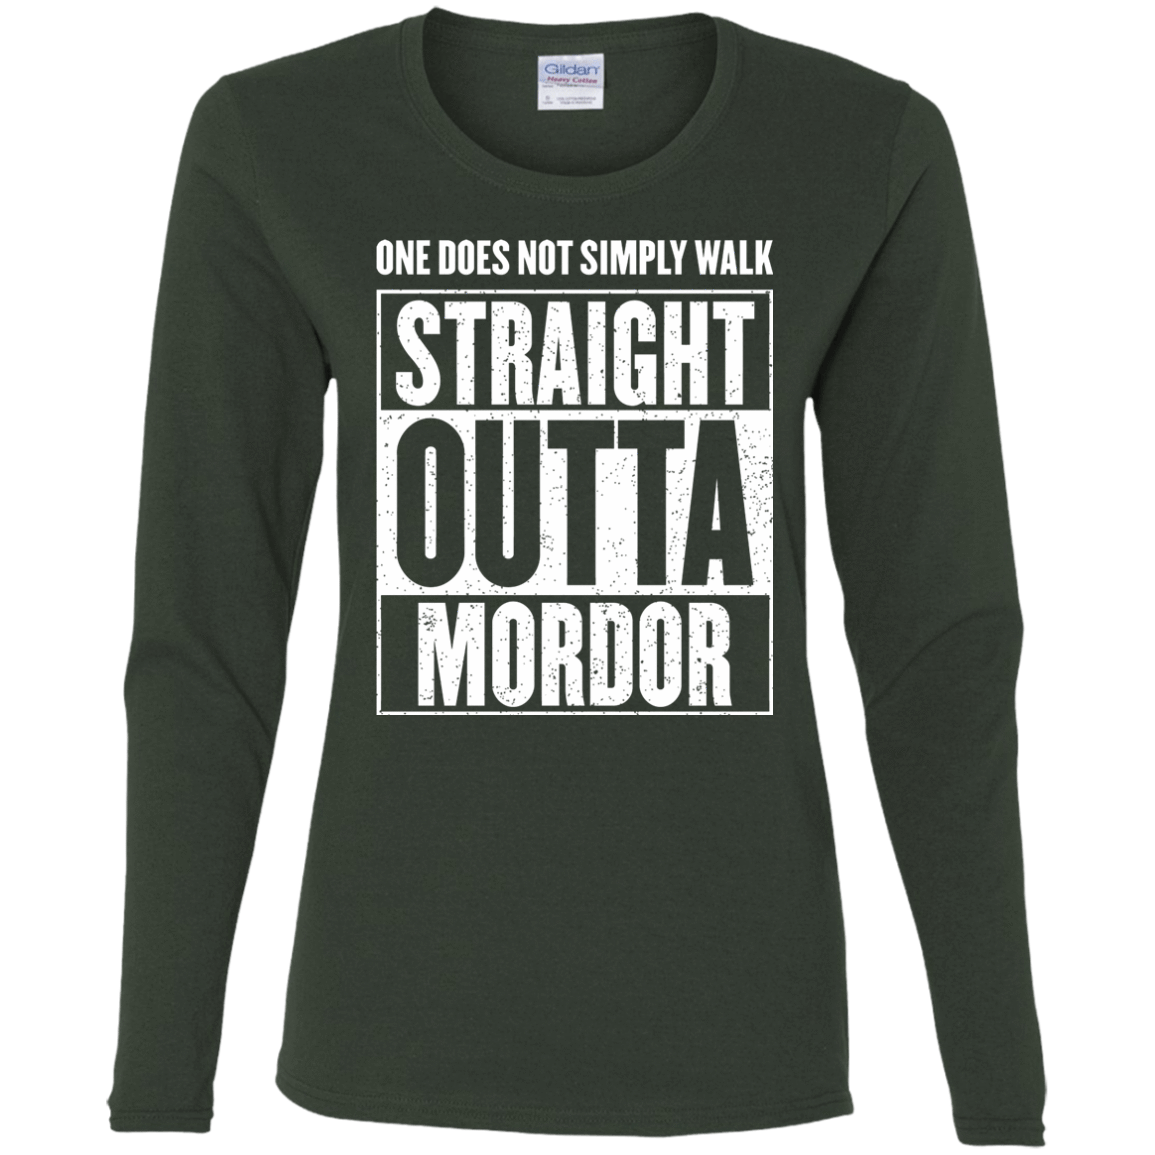 T-Shirts Forest / S Straight Outta Mordor Women's Long Sleeve T-Shirt